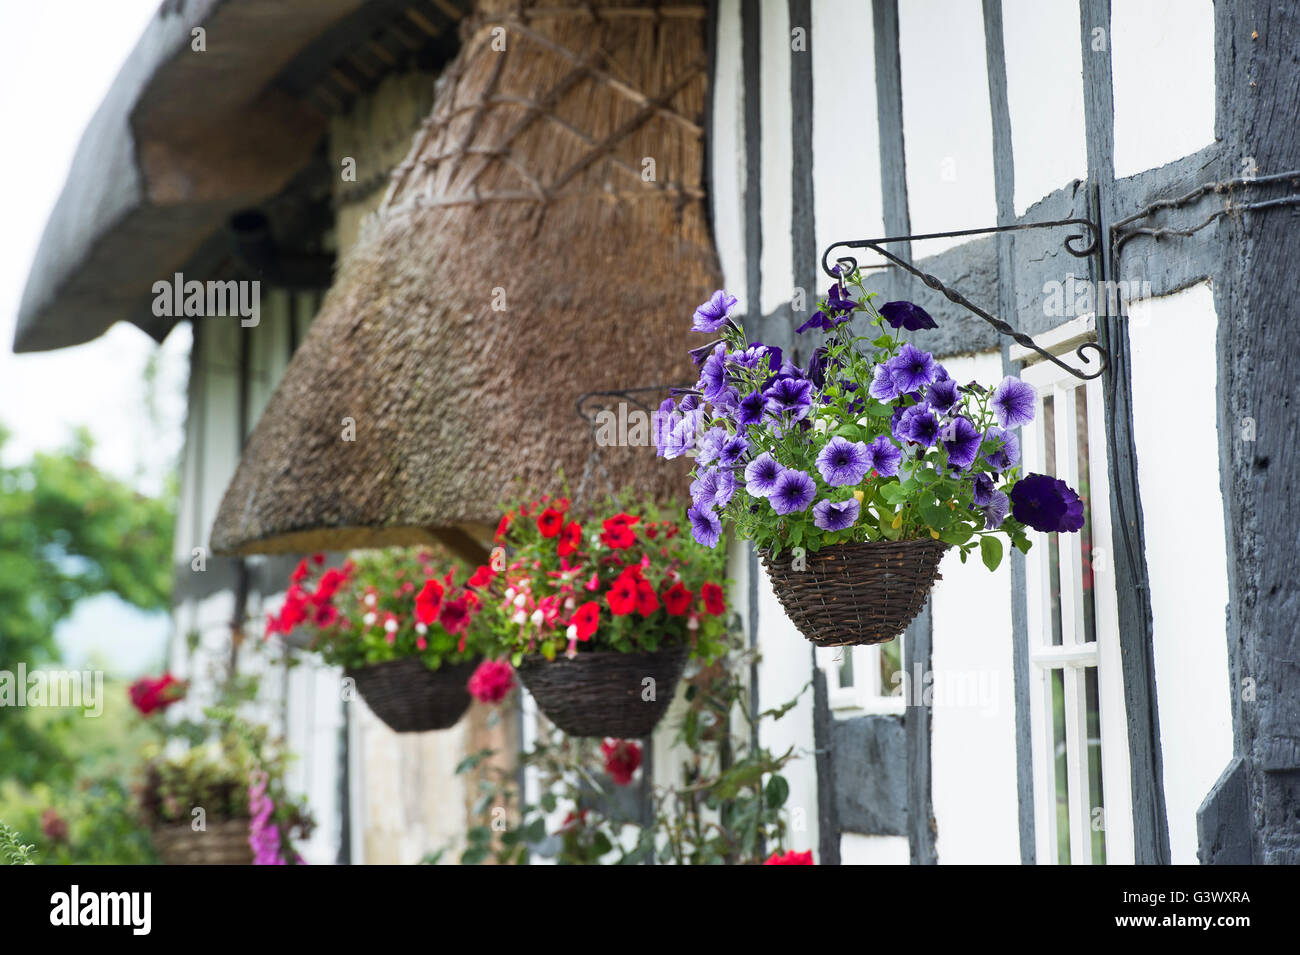 Hanging baskets in front of a black and white timber framed cottage. Ashton Under Hill, Wychavon district, Worcestershire, UK Stock Photo